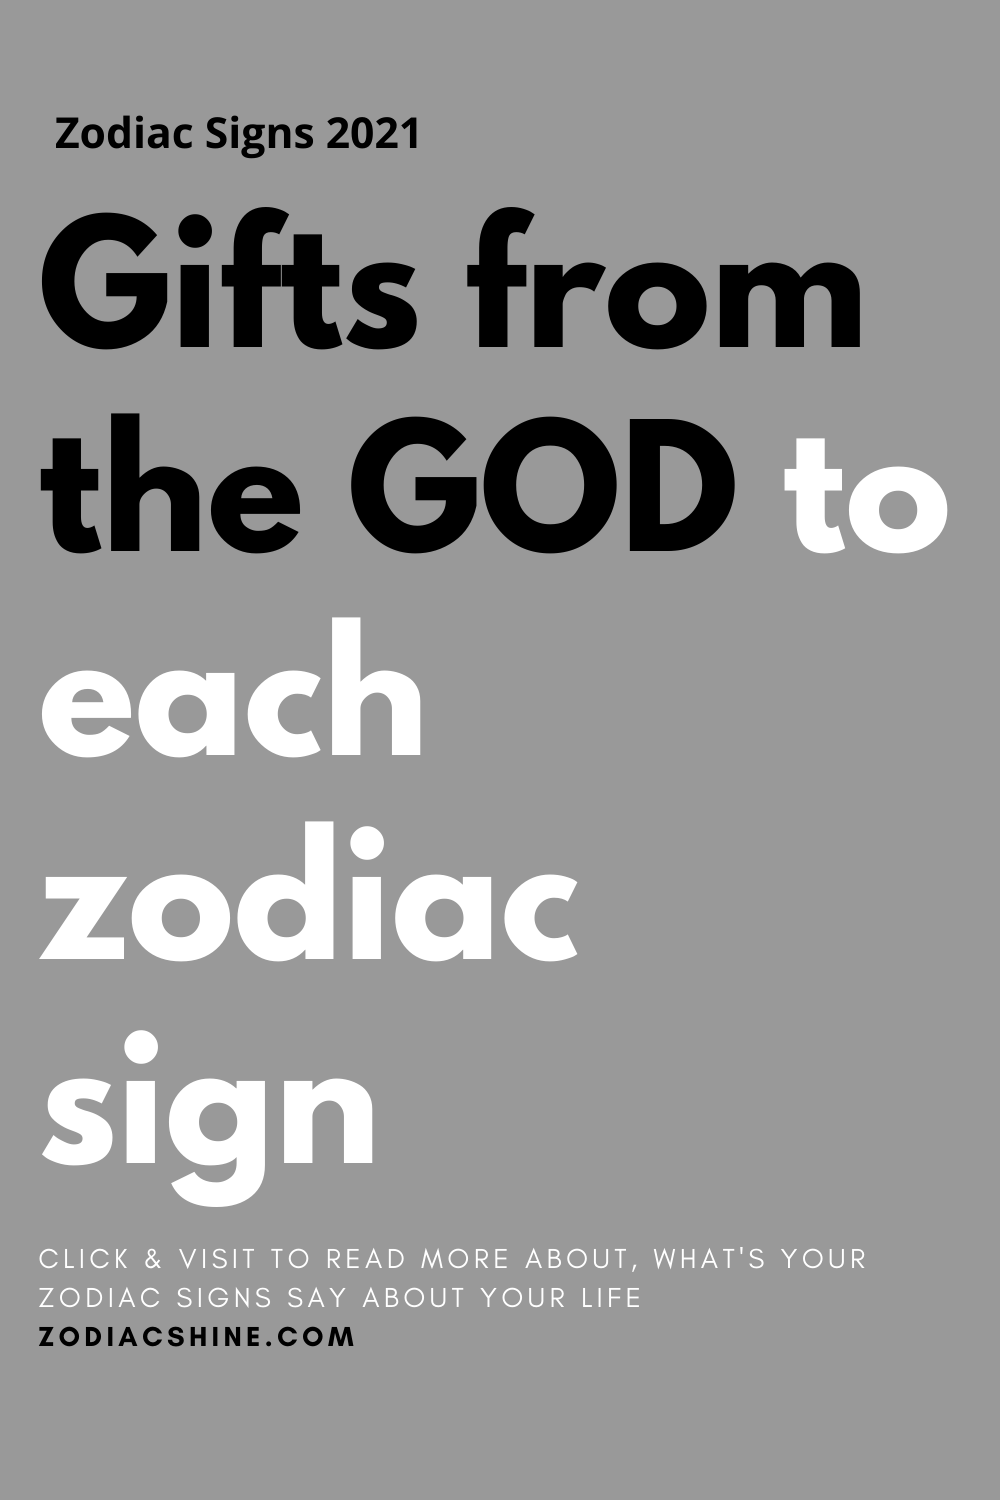 Gifts from the GOD to each zodiac sign